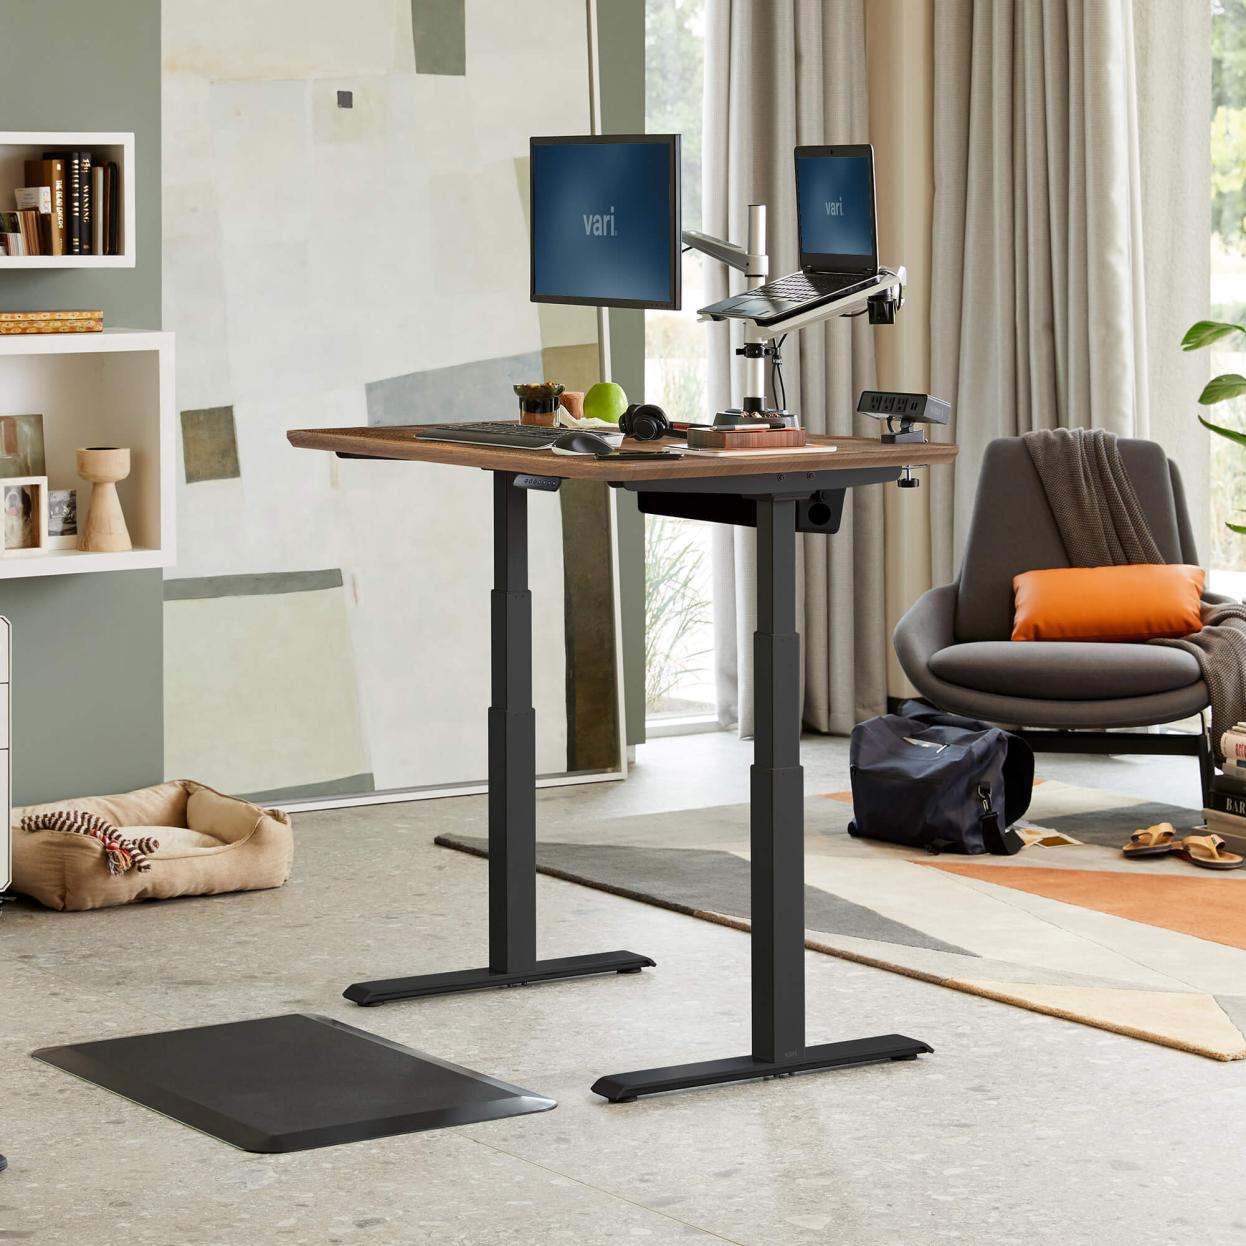 How Much Does a Standing Desk Cost?